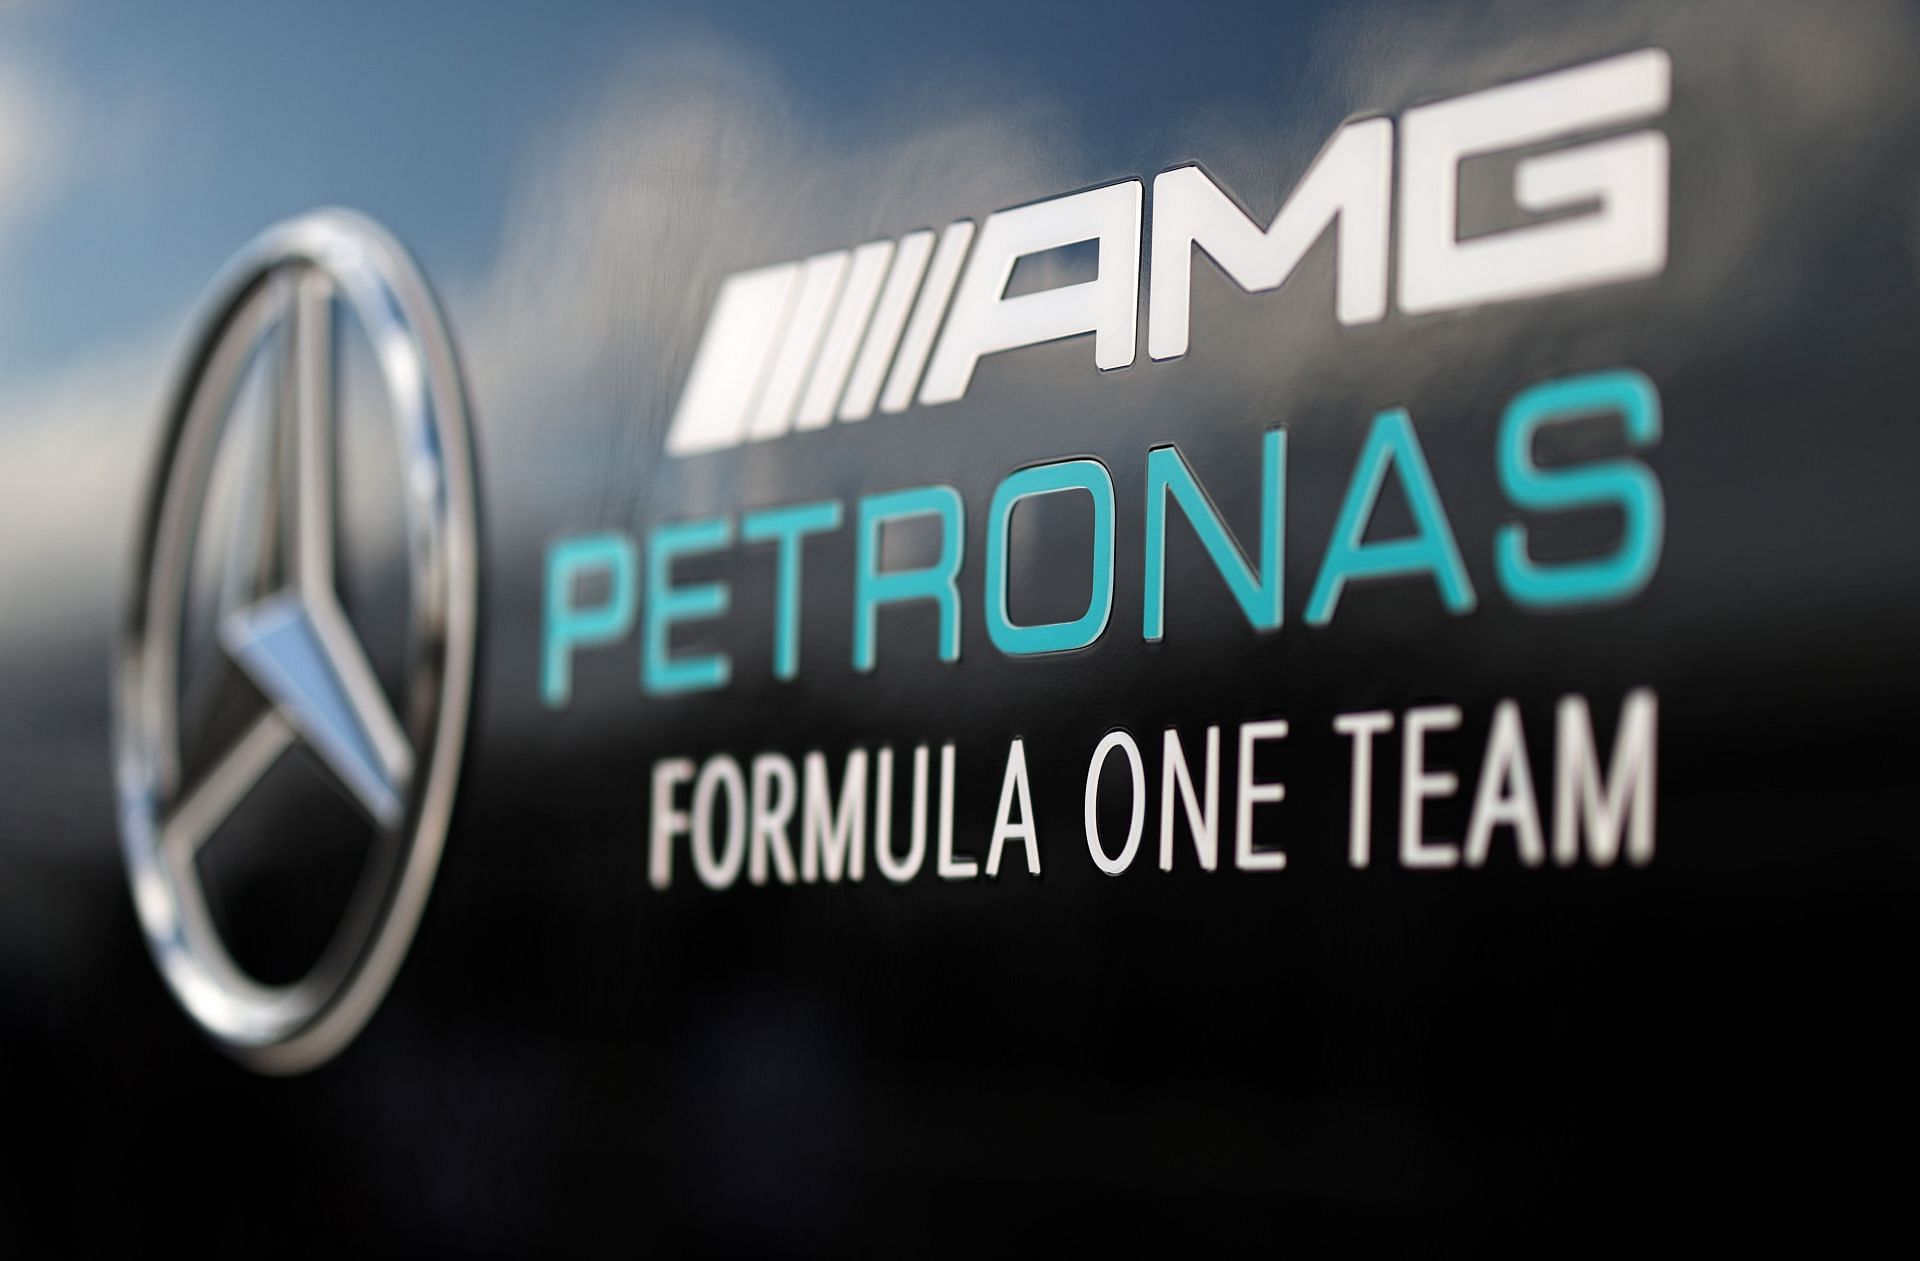 The Mercedes team logo in the F1 Paddock. (Photo by Chris Graythen/Getty Images)